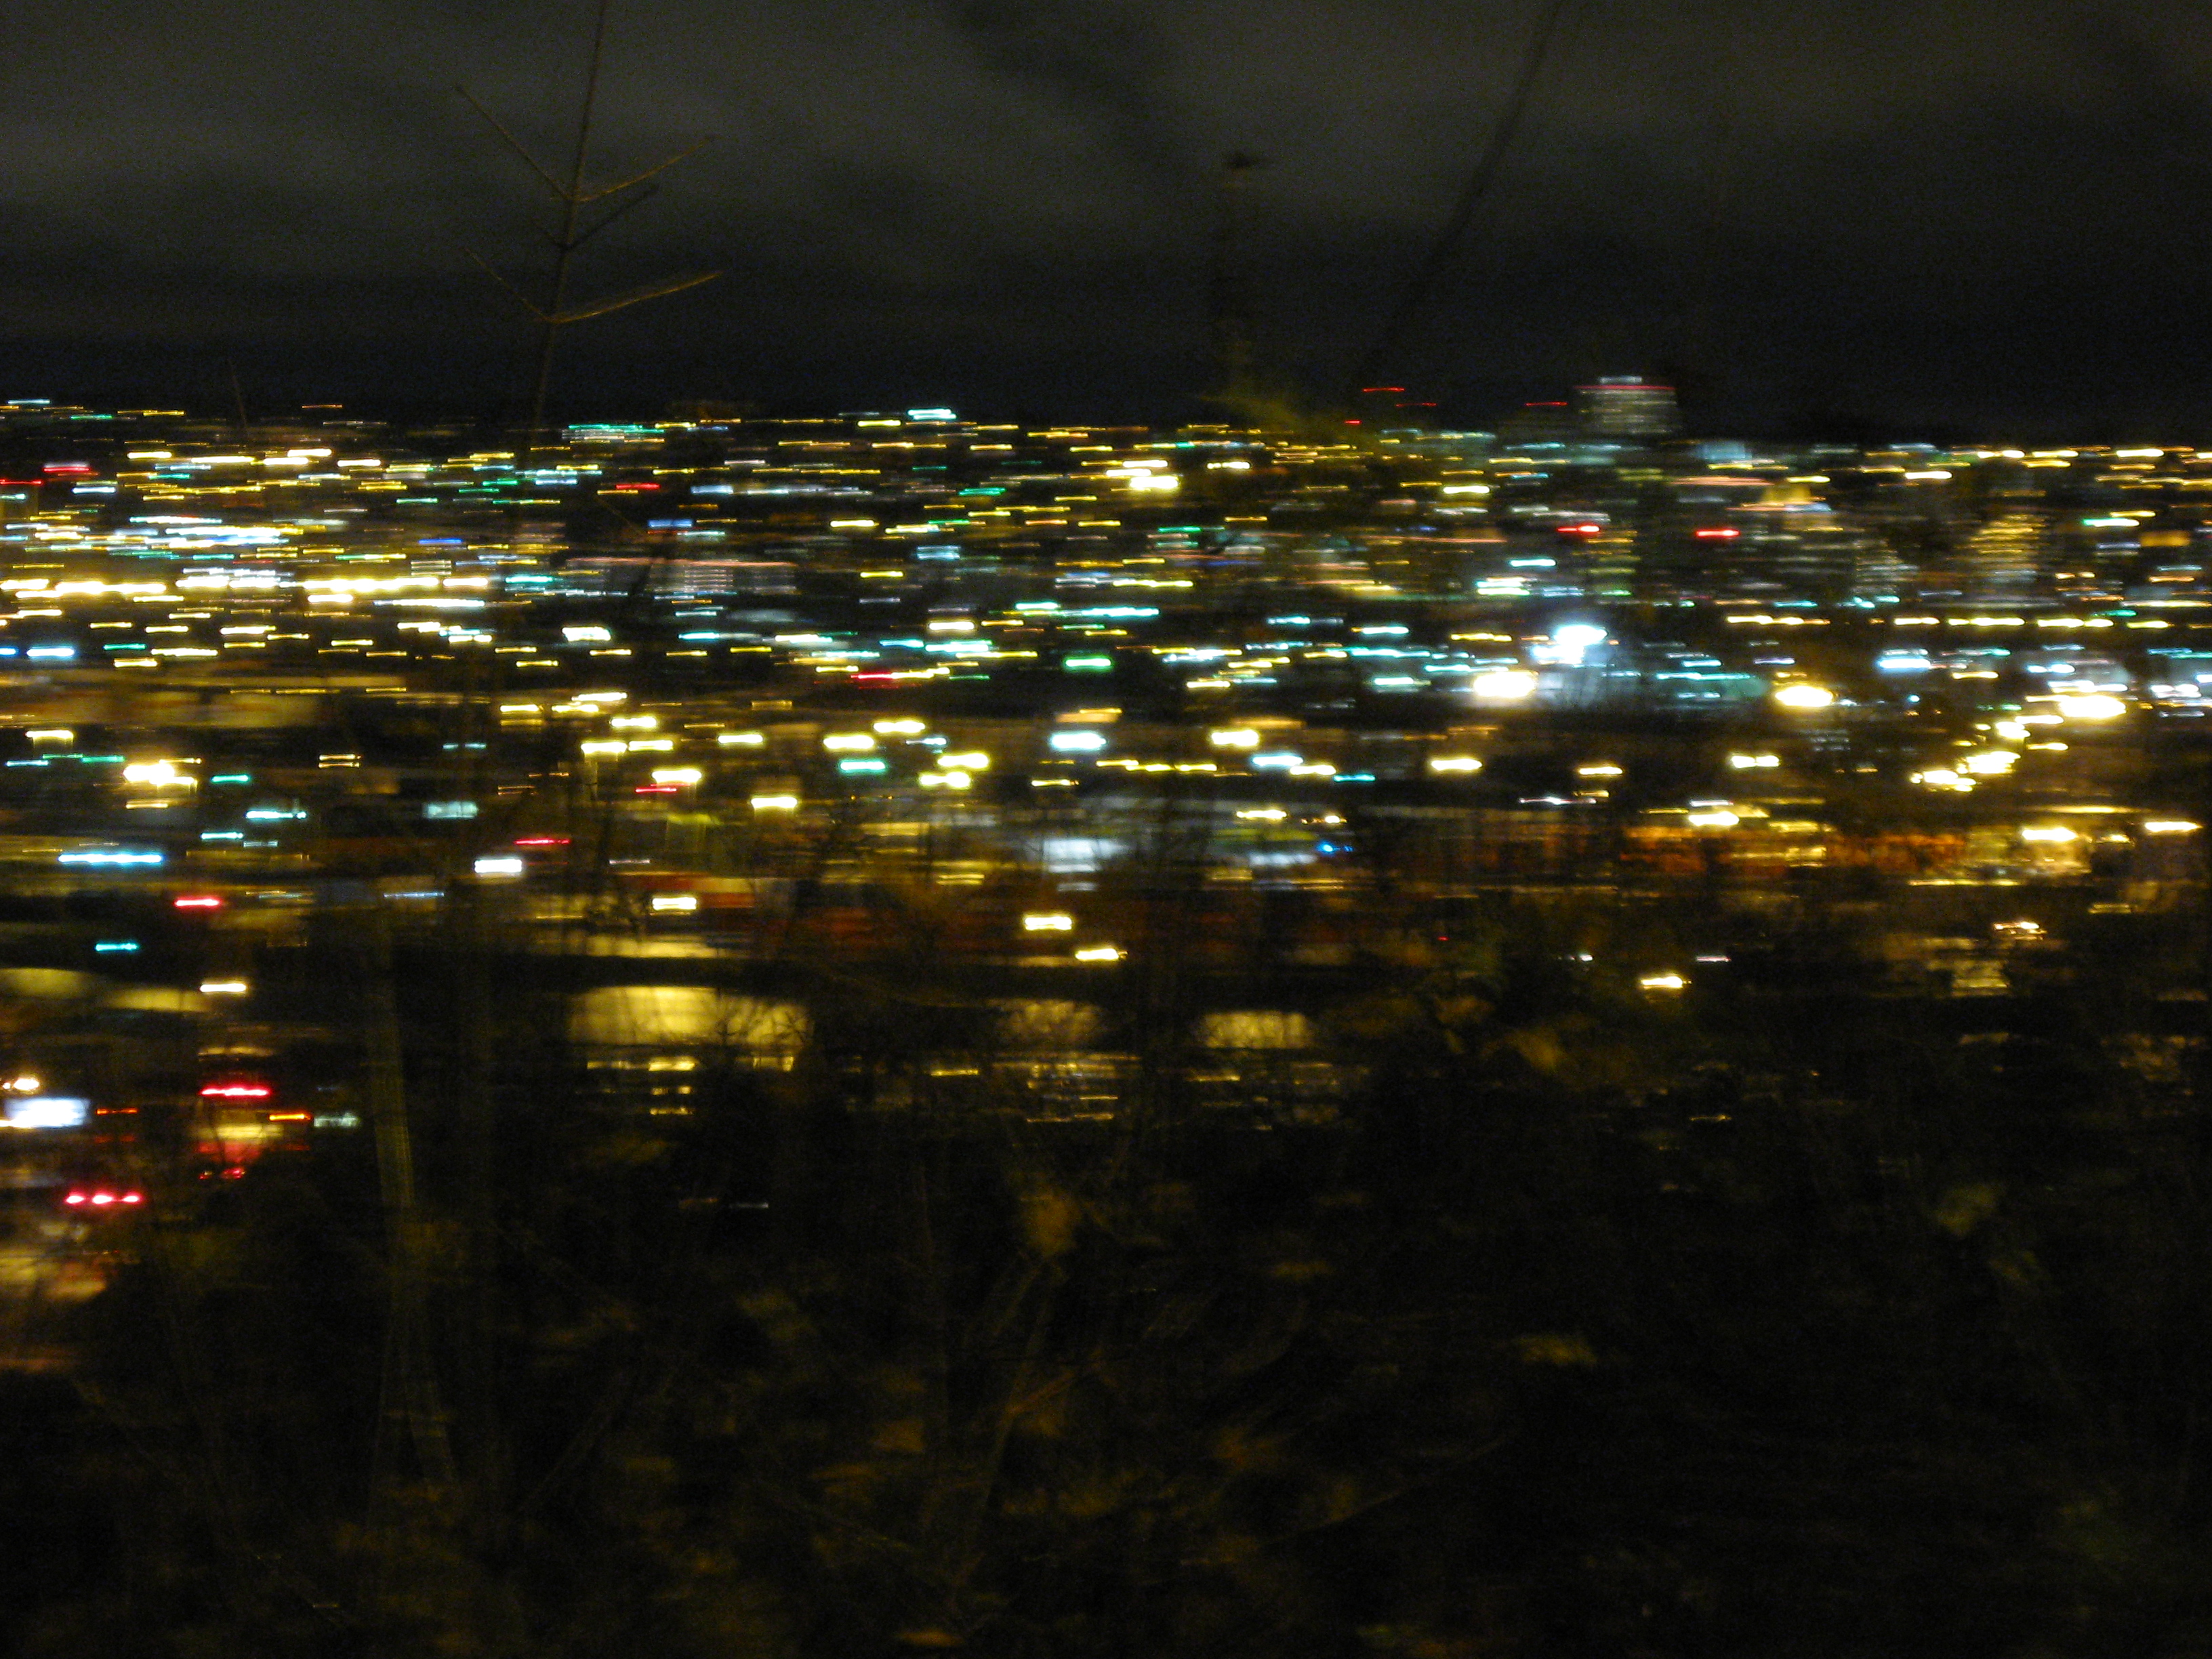 City from hillside near missy's place at night 6 photo